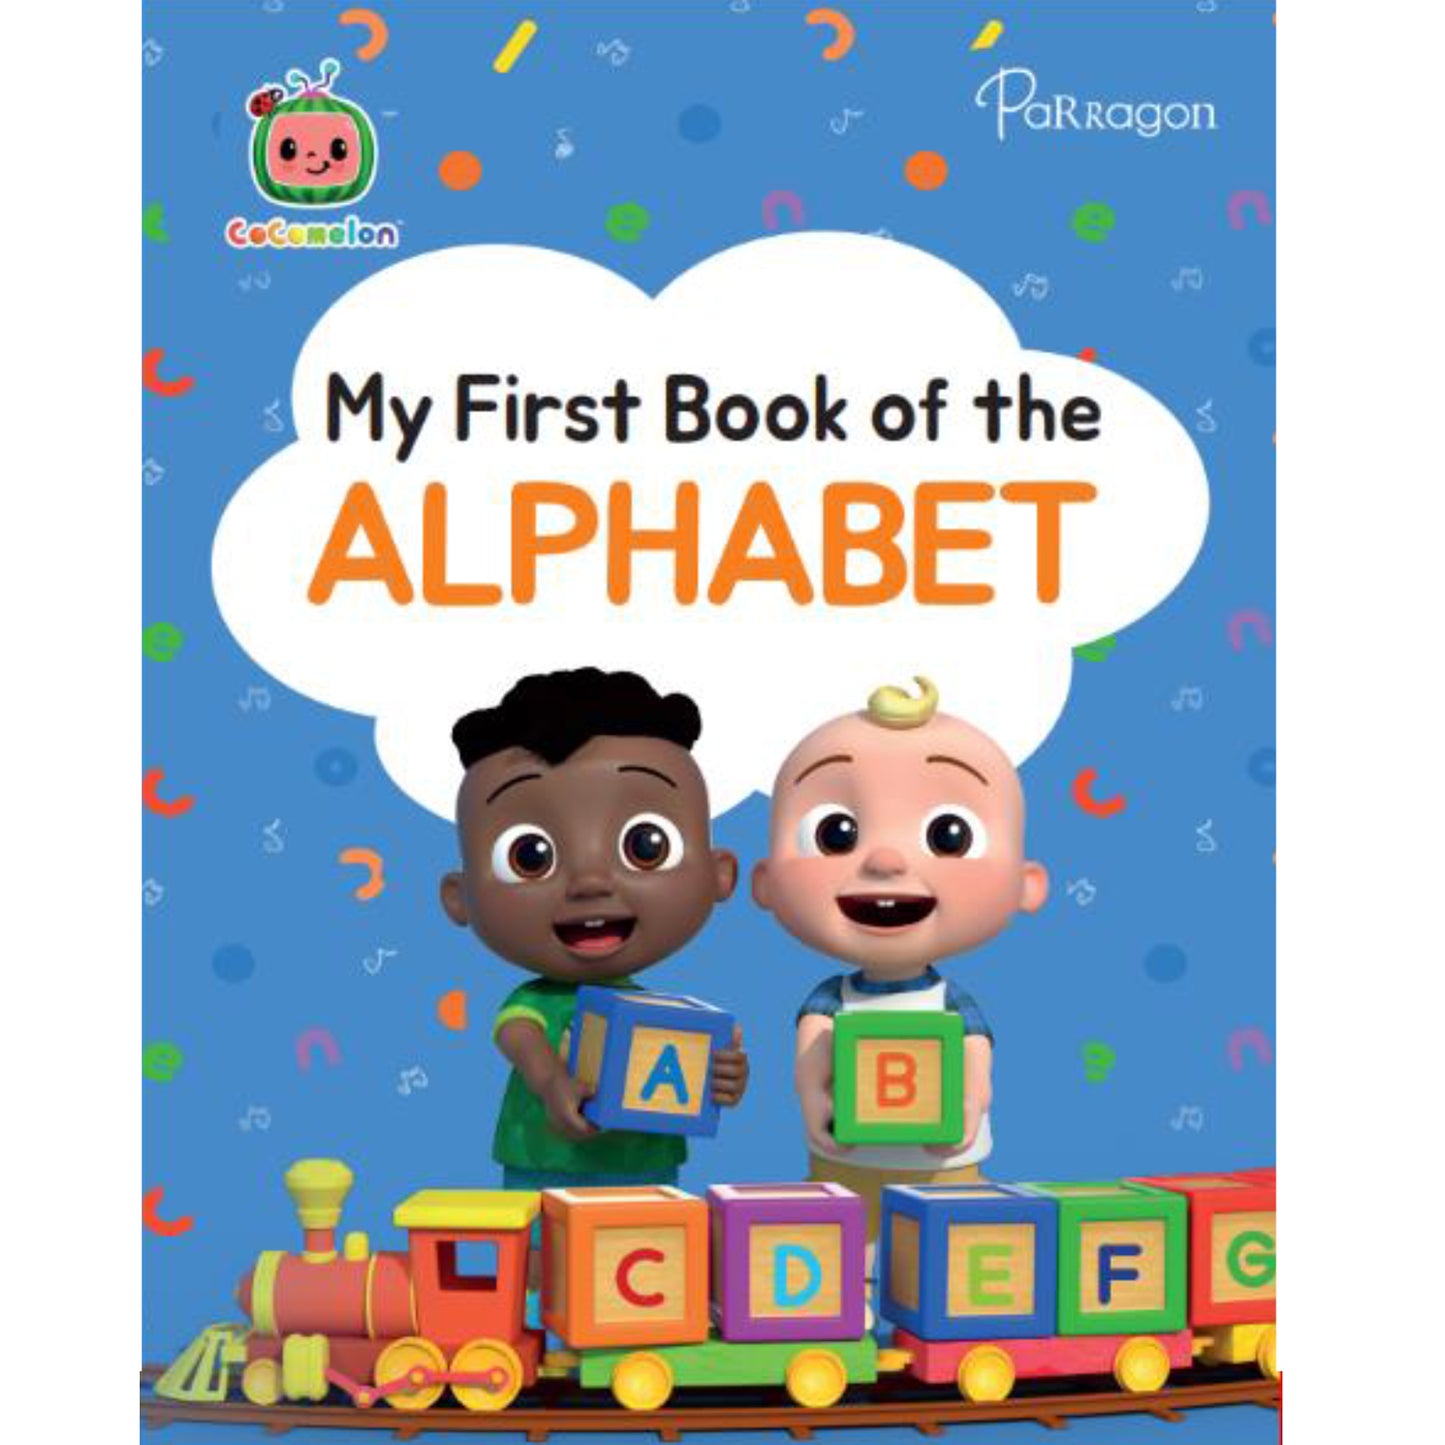 CoComelon My First Book of the Alphabet | Early learning books | CoComelon books | Books for toddlers | Books about alphabet [Paperback] Parragon